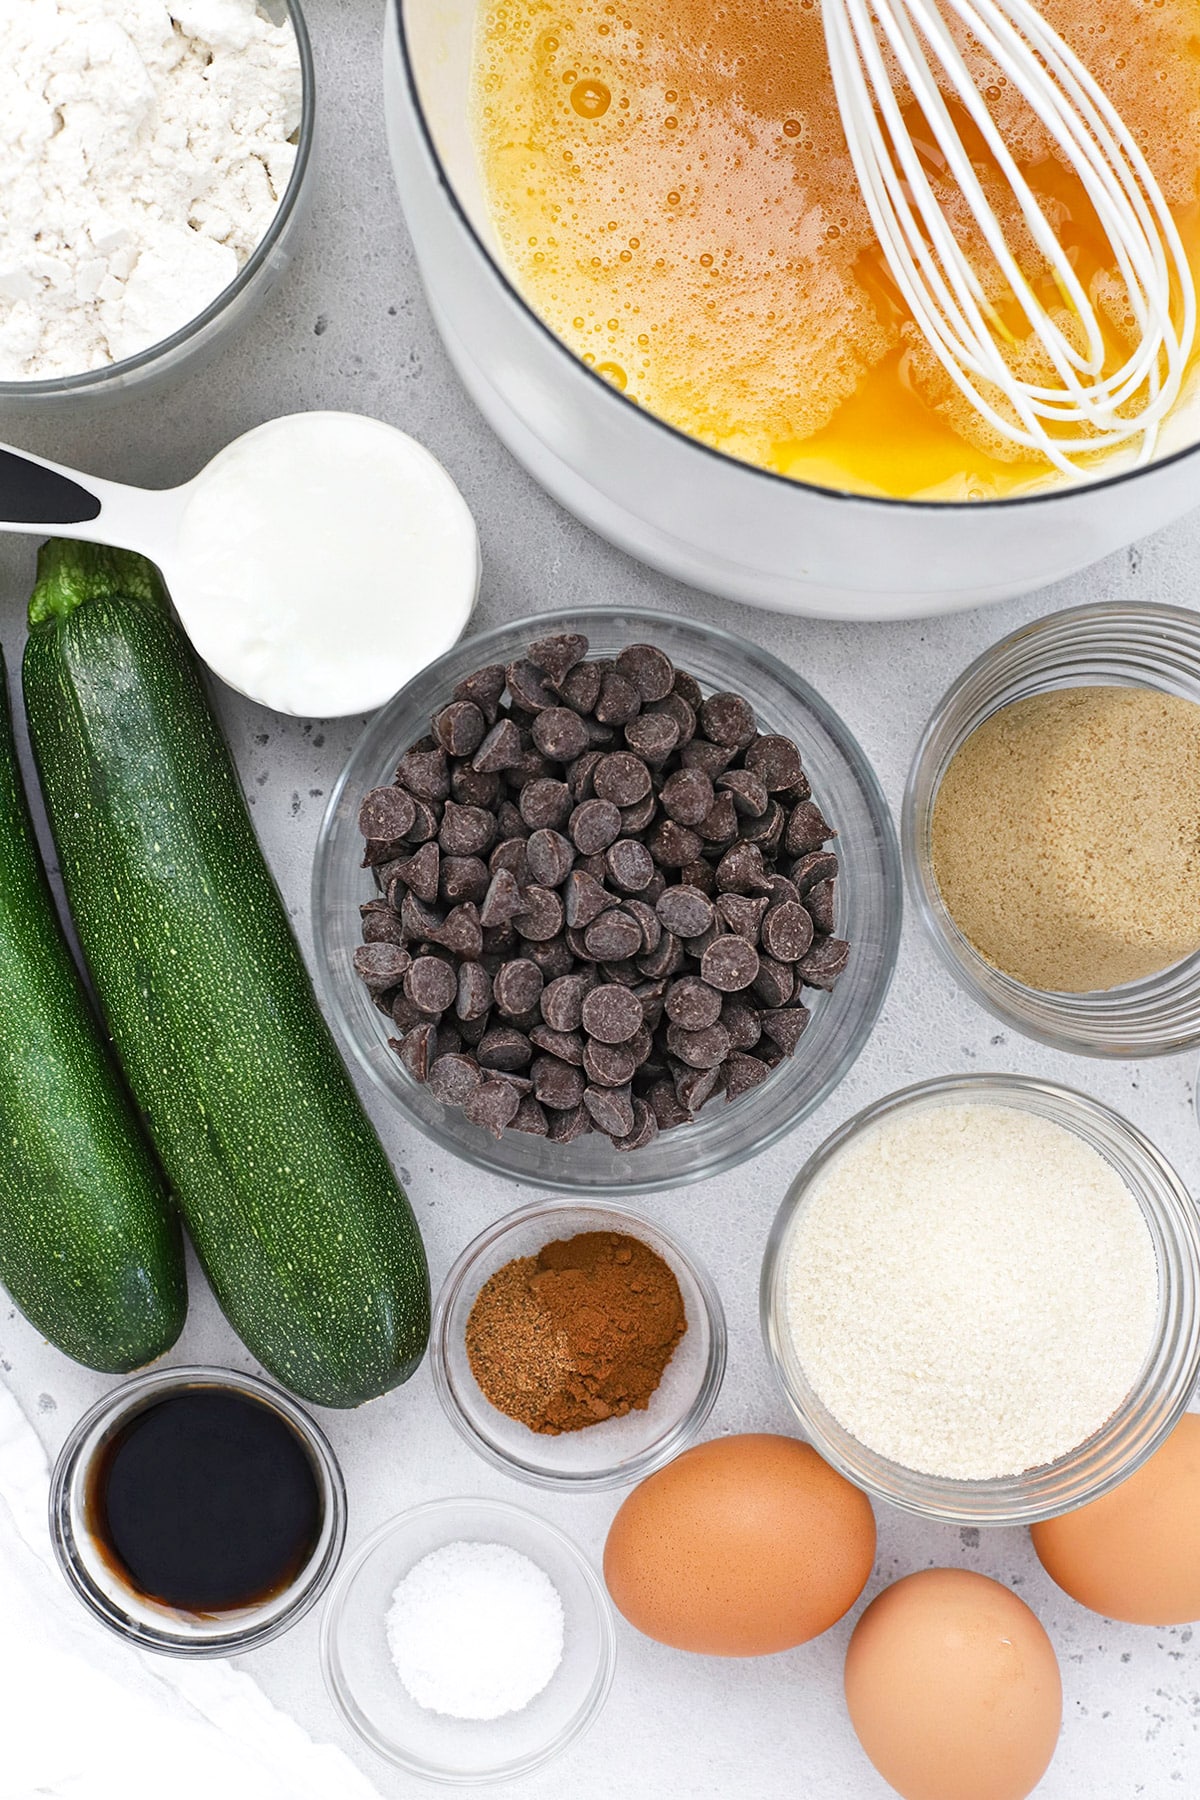 Overhead view of ingredients for gluten-free zucchini muffins